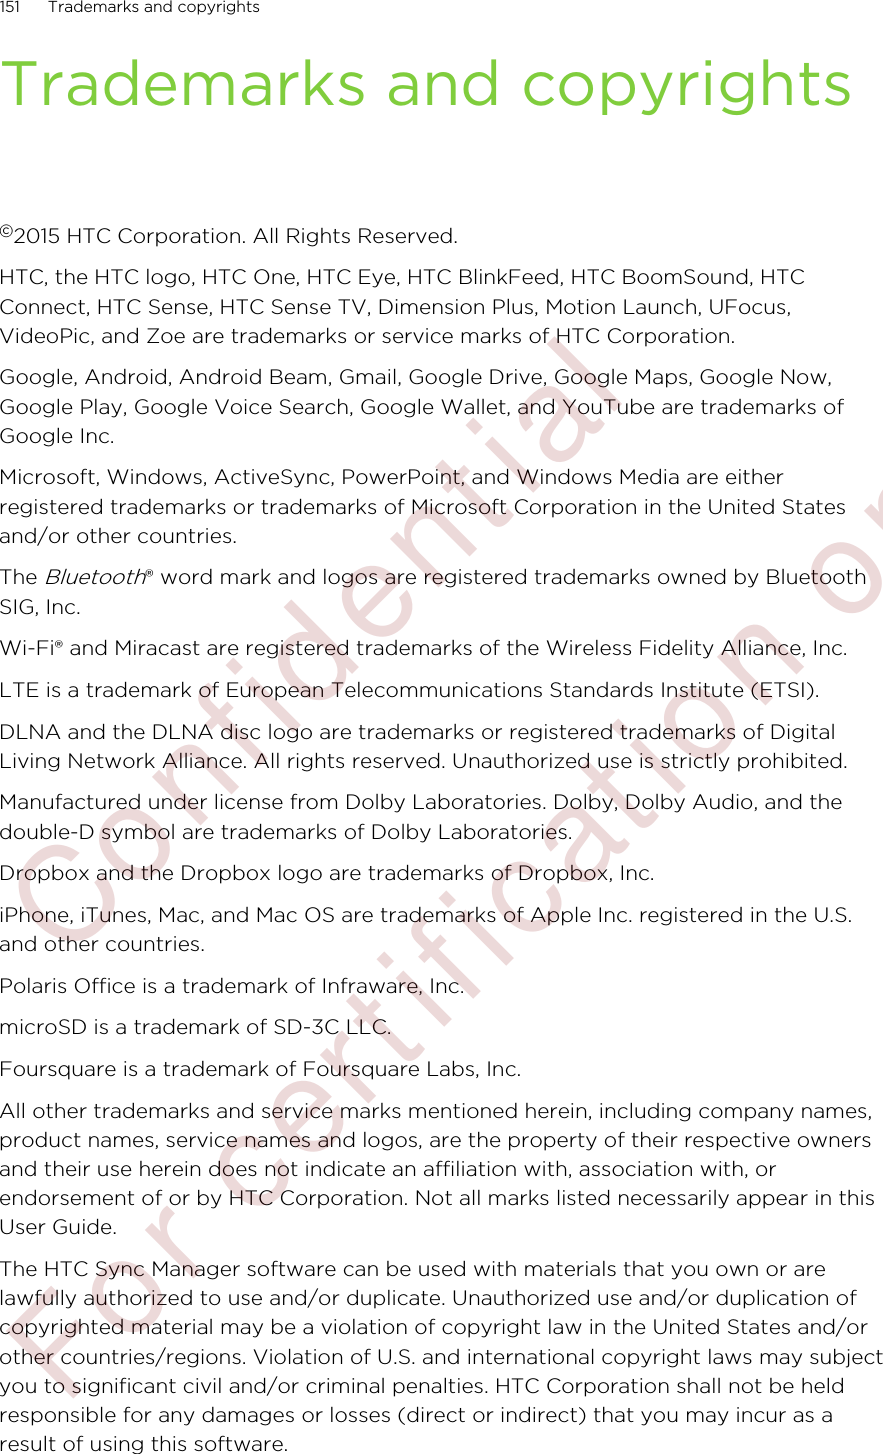 Trademarks and copyrights©2015 HTC Corporation. All Rights Reserved.HTC, the HTC logo, HTC One, HTC Eye, HTC BlinkFeed, HTC BoomSound, HTCConnect, HTC Sense, HTC Sense TV, Dimension Plus, Motion Launch, UFocus,VideoPic, and Zoe are trademarks or service marks of HTC Corporation.Google, Android, Android Beam, Gmail, Google Drive, Google Maps, Google Now,Google Play, Google Voice Search, Google Wallet, and YouTube are trademarks ofGoogle Inc.Microsoft, Windows, ActiveSync, PowerPoint, and Windows Media are eitherregistered trademarks or trademarks of Microsoft Corporation in the United Statesand/or other countries.The Bluetooth® word mark and logos are registered trademarks owned by BluetoothSIG, Inc.Wi-Fi® and Miracast are registered trademarks of the Wireless Fidelity Alliance, Inc.LTE is a trademark of European Telecommunications Standards Institute (ETSI).DLNA and the DLNA disc logo are trademarks or registered trademarks of DigitalLiving Network Alliance. All rights reserved. Unauthorized use is strictly prohibited.Manufactured under license from Dolby Laboratories. Dolby, Dolby Audio, and thedouble-D symbol are trademarks of Dolby Laboratories.Dropbox and the Dropbox logo are trademarks of Dropbox, Inc.iPhone, iTunes, Mac, and Mac OS are trademarks of Apple Inc. registered in the U.S.and other countries.Polaris Office is a trademark of Infraware, Inc.microSD is a trademark of SD-3C LLC.Foursquare is a trademark of Foursquare Labs, Inc.All other trademarks and service marks mentioned herein, including company names,product names, service names and logos, are the property of their respective ownersand their use herein does not indicate an affiliation with, association with, orendorsement of or by HTC Corporation. Not all marks listed necessarily appear in thisUser Guide.The HTC Sync Manager software can be used with materials that you own or arelawfully authorized to use and/or duplicate. Unauthorized use and/or duplication ofcopyrighted material may be a violation of copyright law in the United States and/orother countries/regions. Violation of U.S. and international copyright laws may subjectyou to significant civil and/or criminal penalties. HTC Corporation shall not be heldresponsible for any damages or losses (direct or indirect) that you may incur as aresult of using this software.151 Trademarks and copyrights        Confident ial  For cert ificat ion only